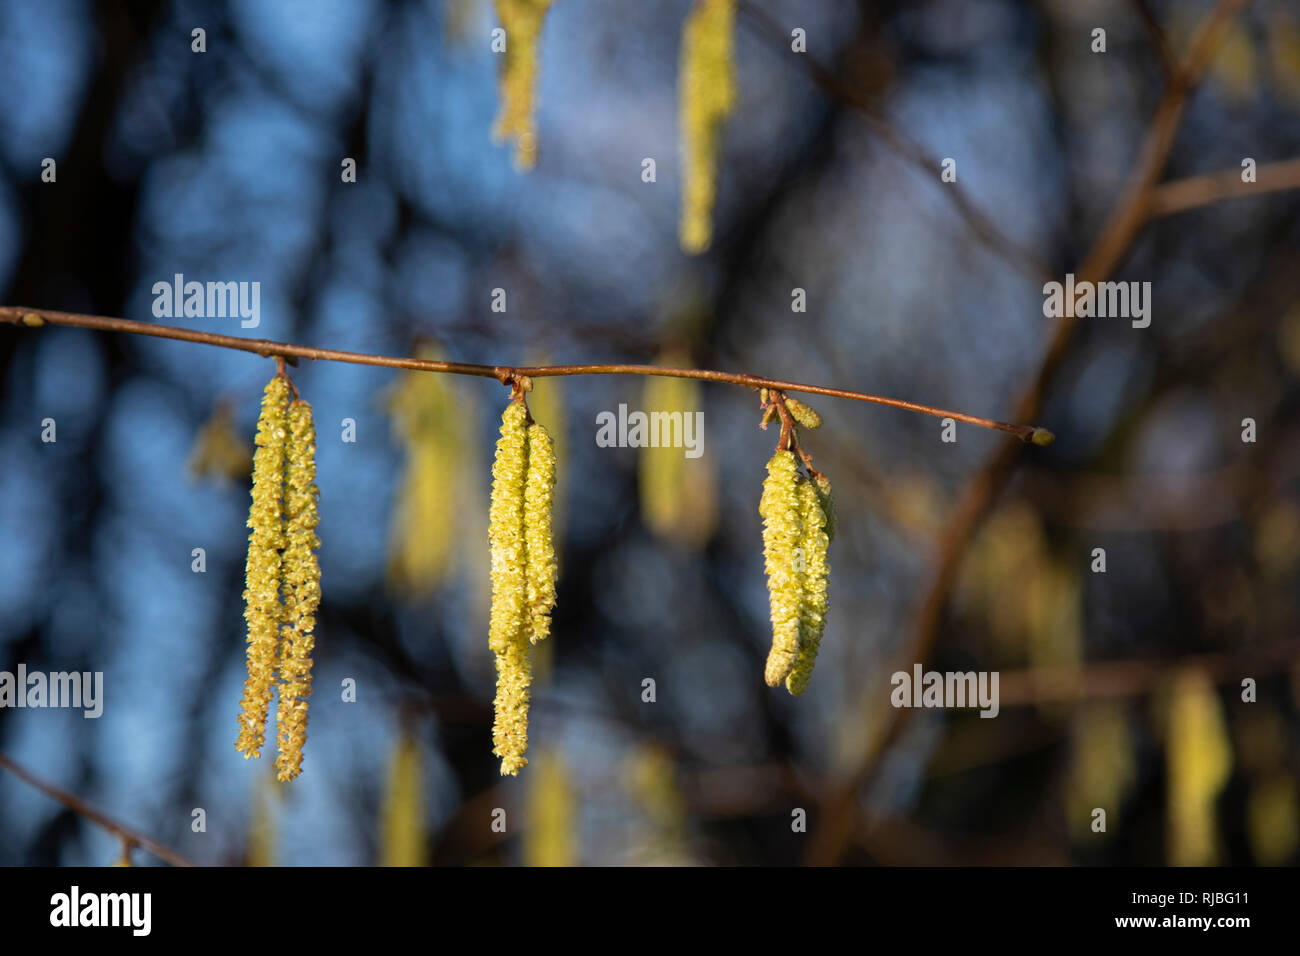 Spring seems to have come very early as catkins appear in December on trees in a park in Birmingham, United Kingdom. Catkin-bearing plants include many other trees or shrubs such as birch, willow, hickory, sweet chestnut. Stock Photo